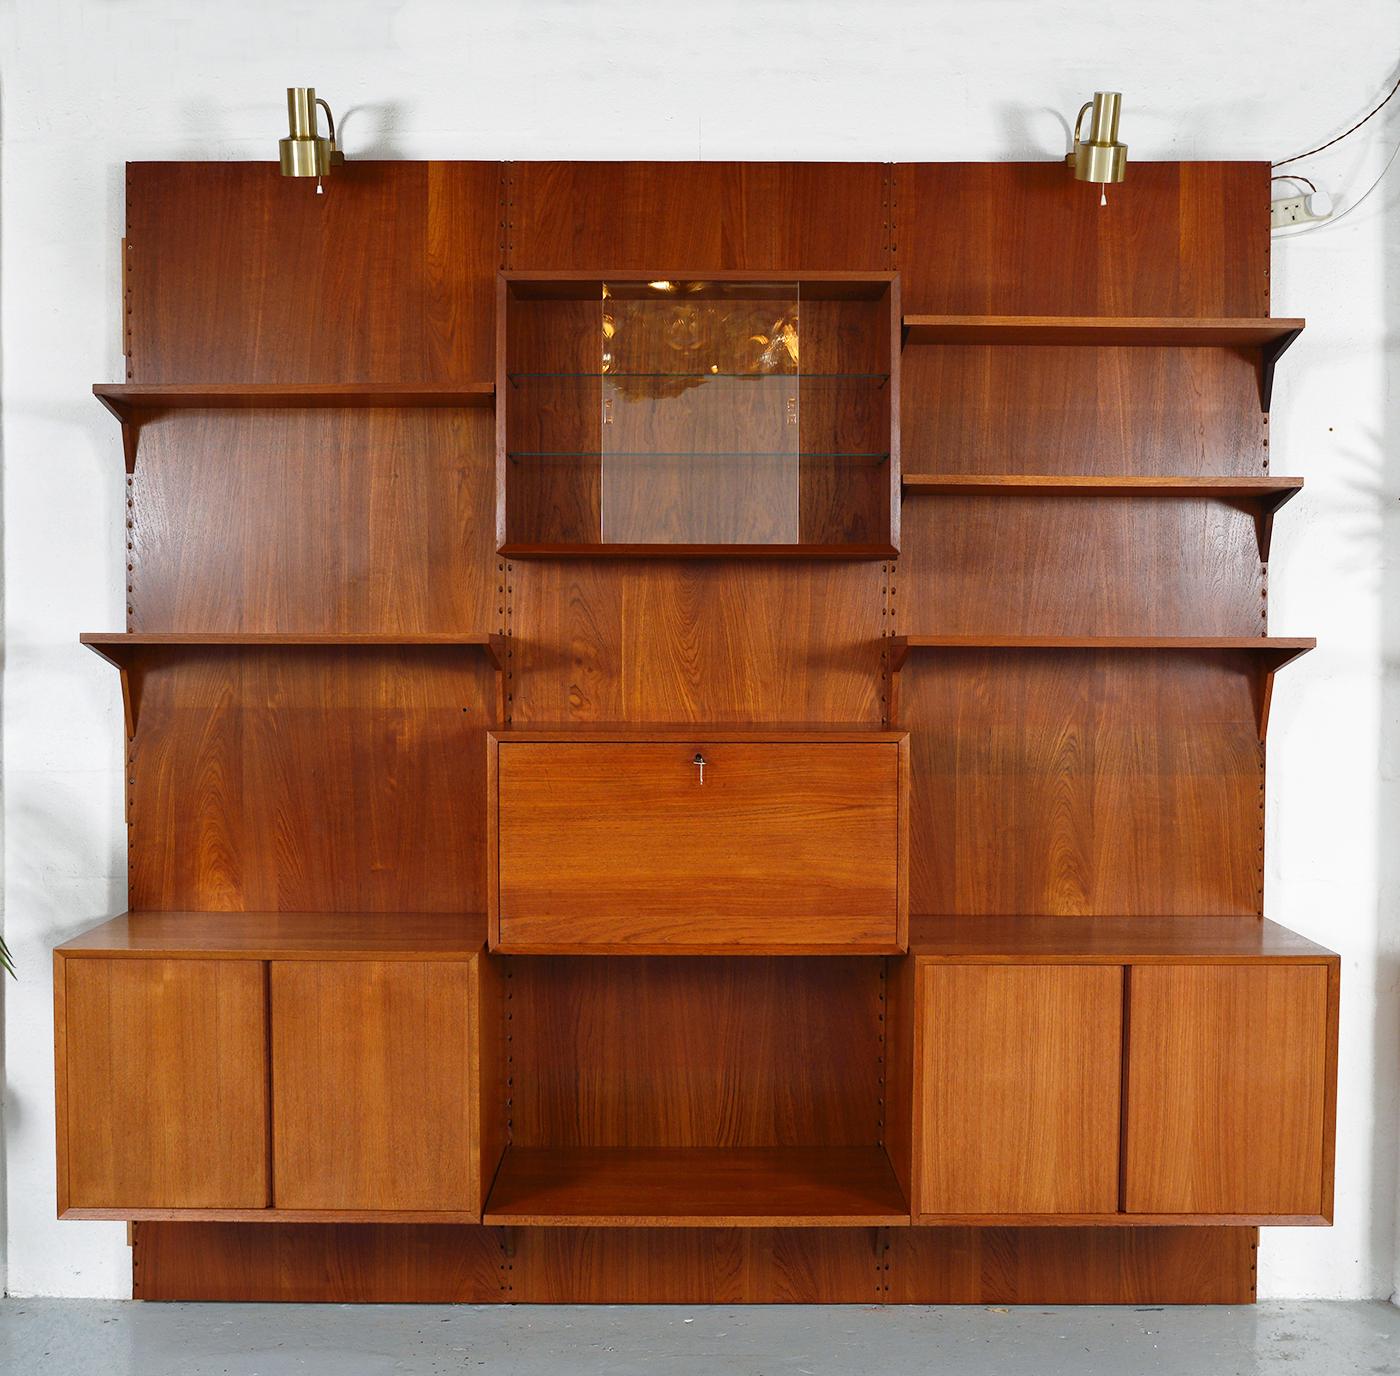 A highly versatile and functional three-bay teak Cado wall system by Danish designer Poul Cadovius. Comprising of three backboards, two cupboards, drop-down bar, glass fronted cabinet, six shelves and brackets - completed by a pair of adjustable